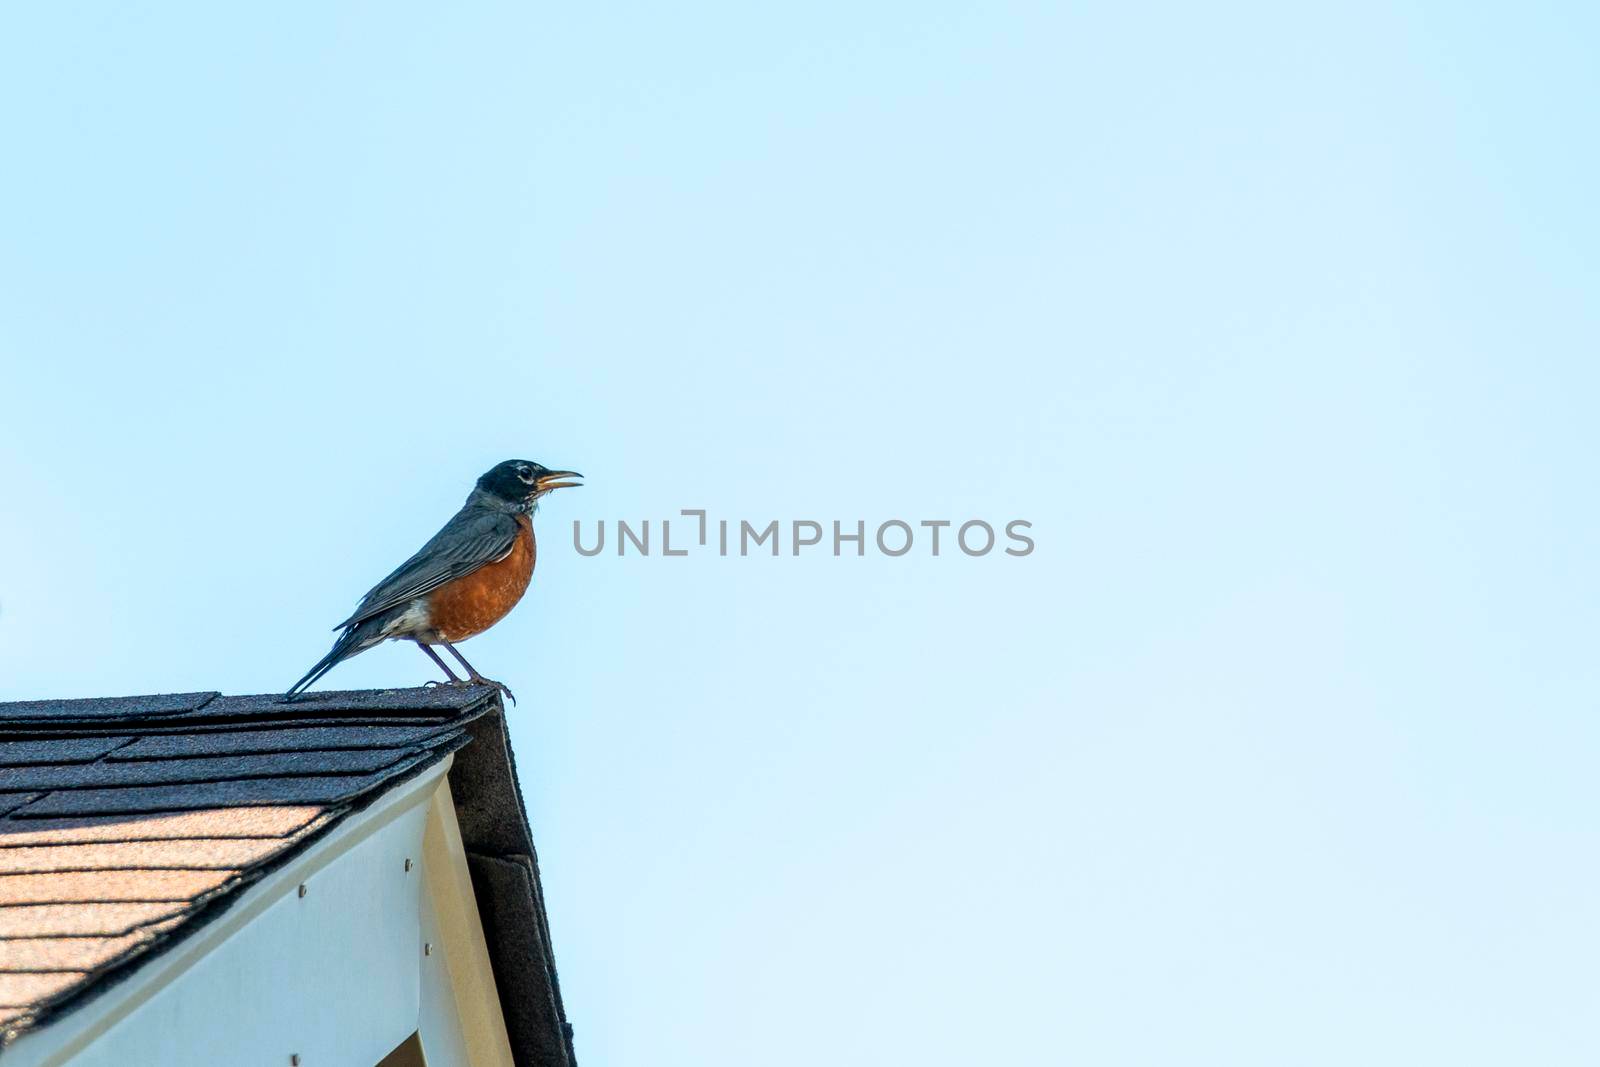 The bird singer on the roof by ben44